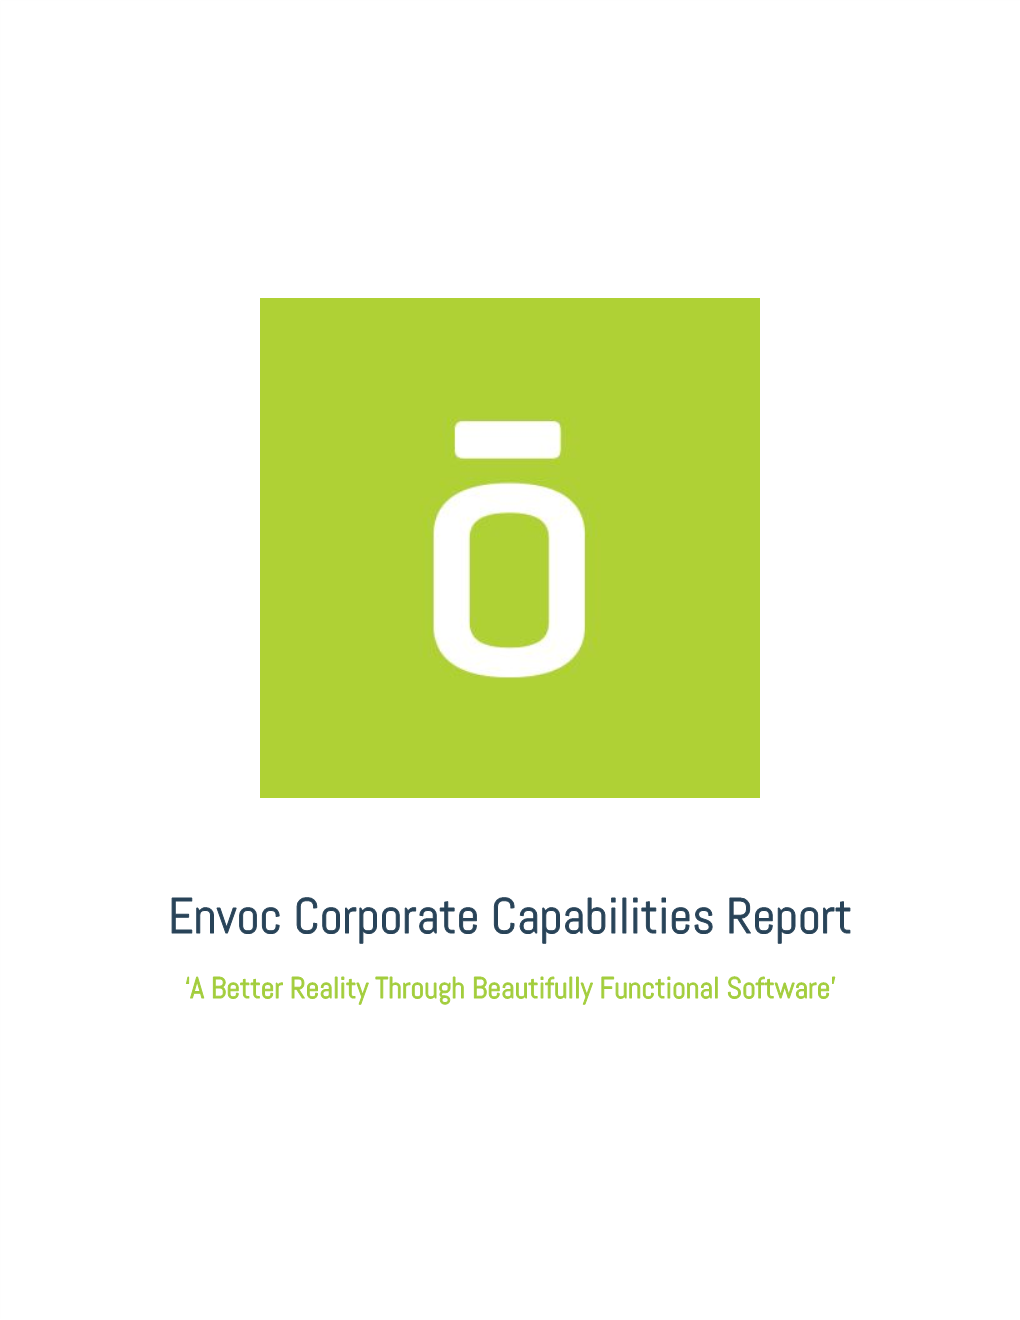 Envoc Corporate Capabilities Report ‘A Better Reality Through Beautifully Functional Software’